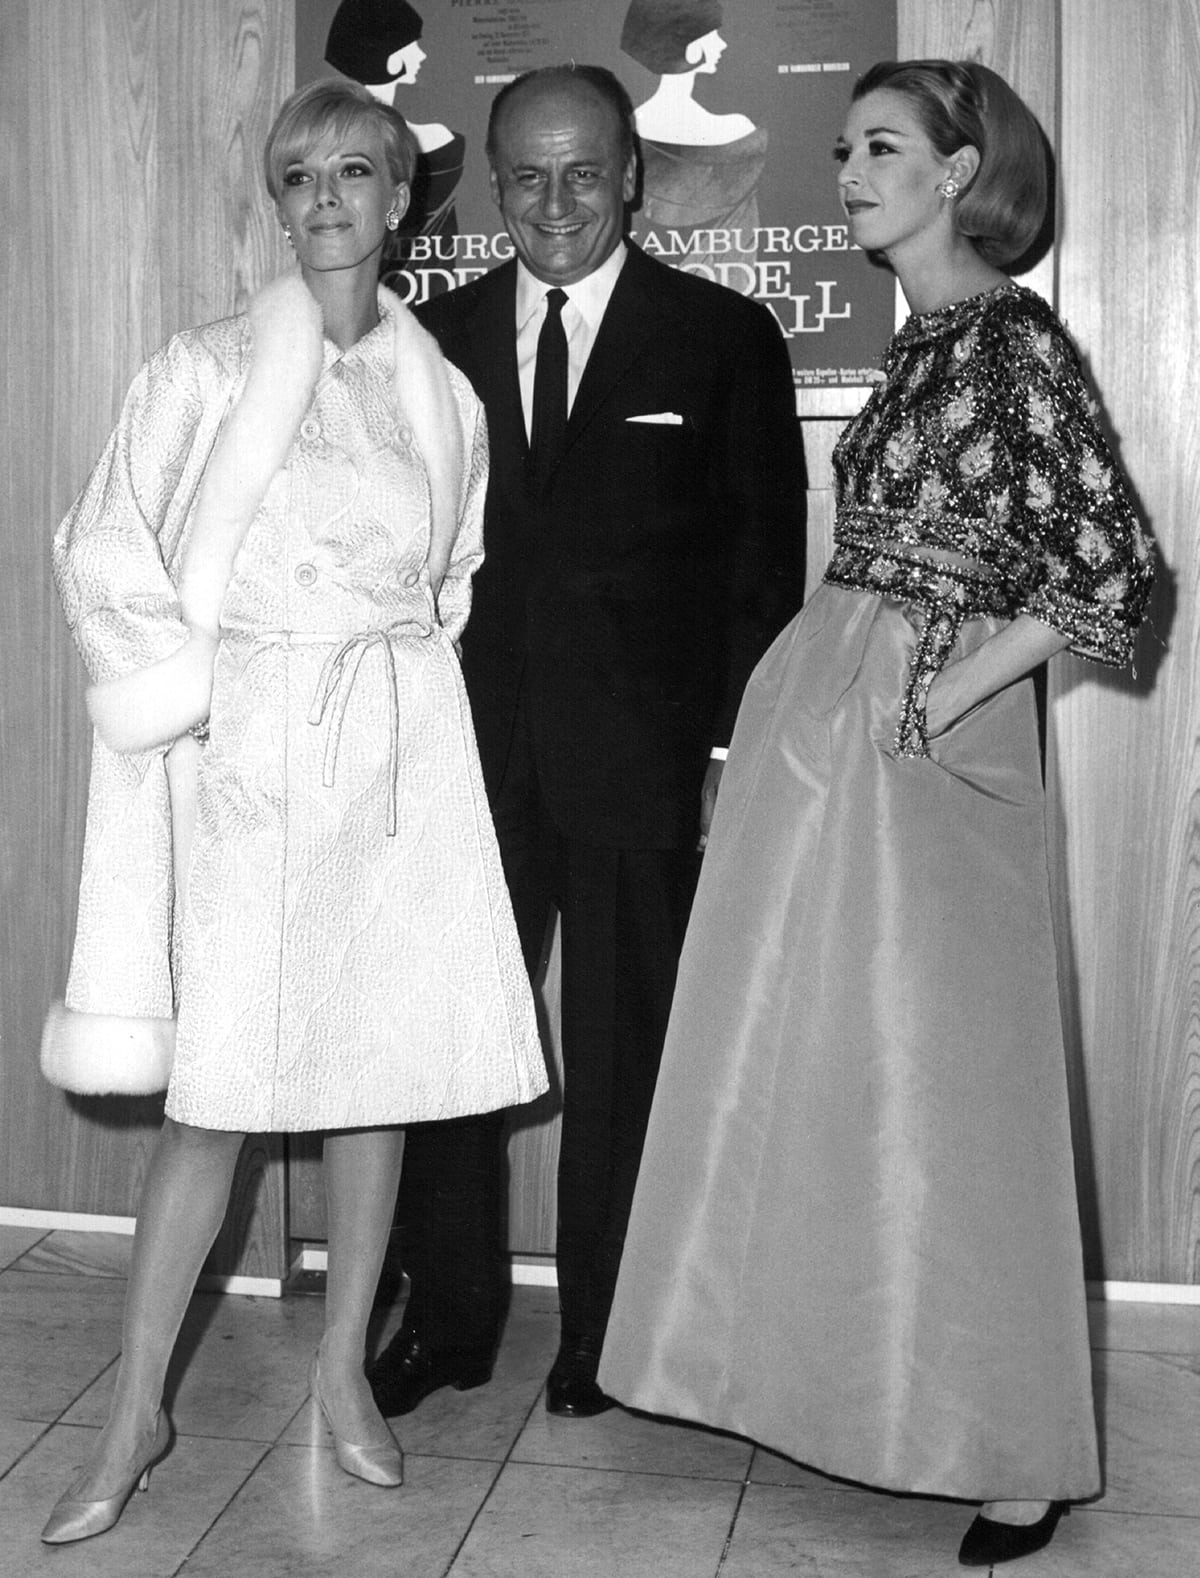 French fashion designer Pierre Balmain with two models at the fashion ball in Hamburg, Germany in 1965